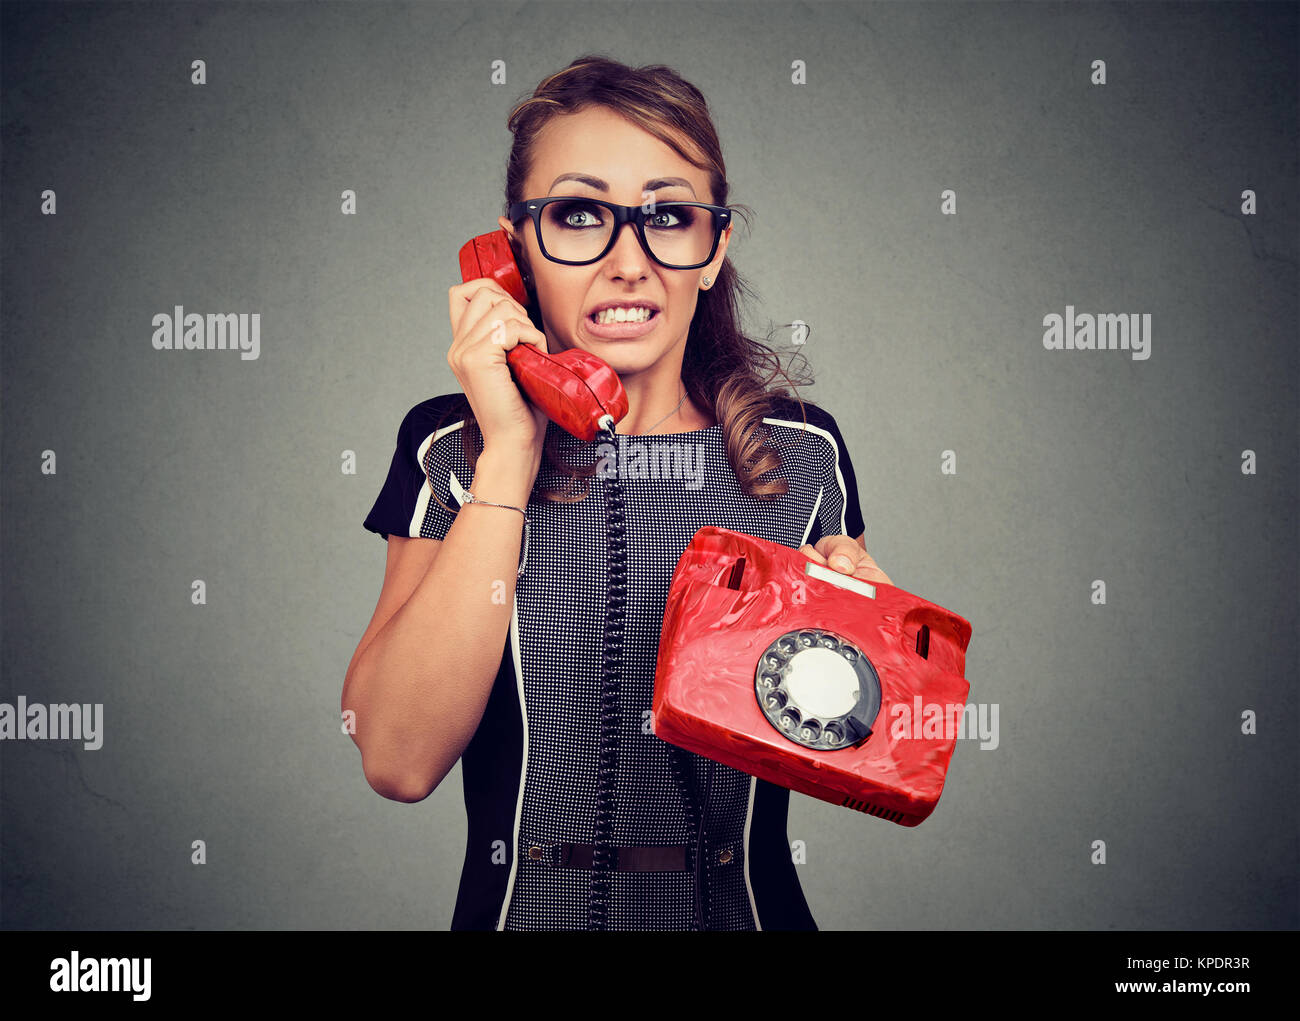 Young nervous woman speaking on retro telephone and looking away having troubles with person on other end. Stock Photo